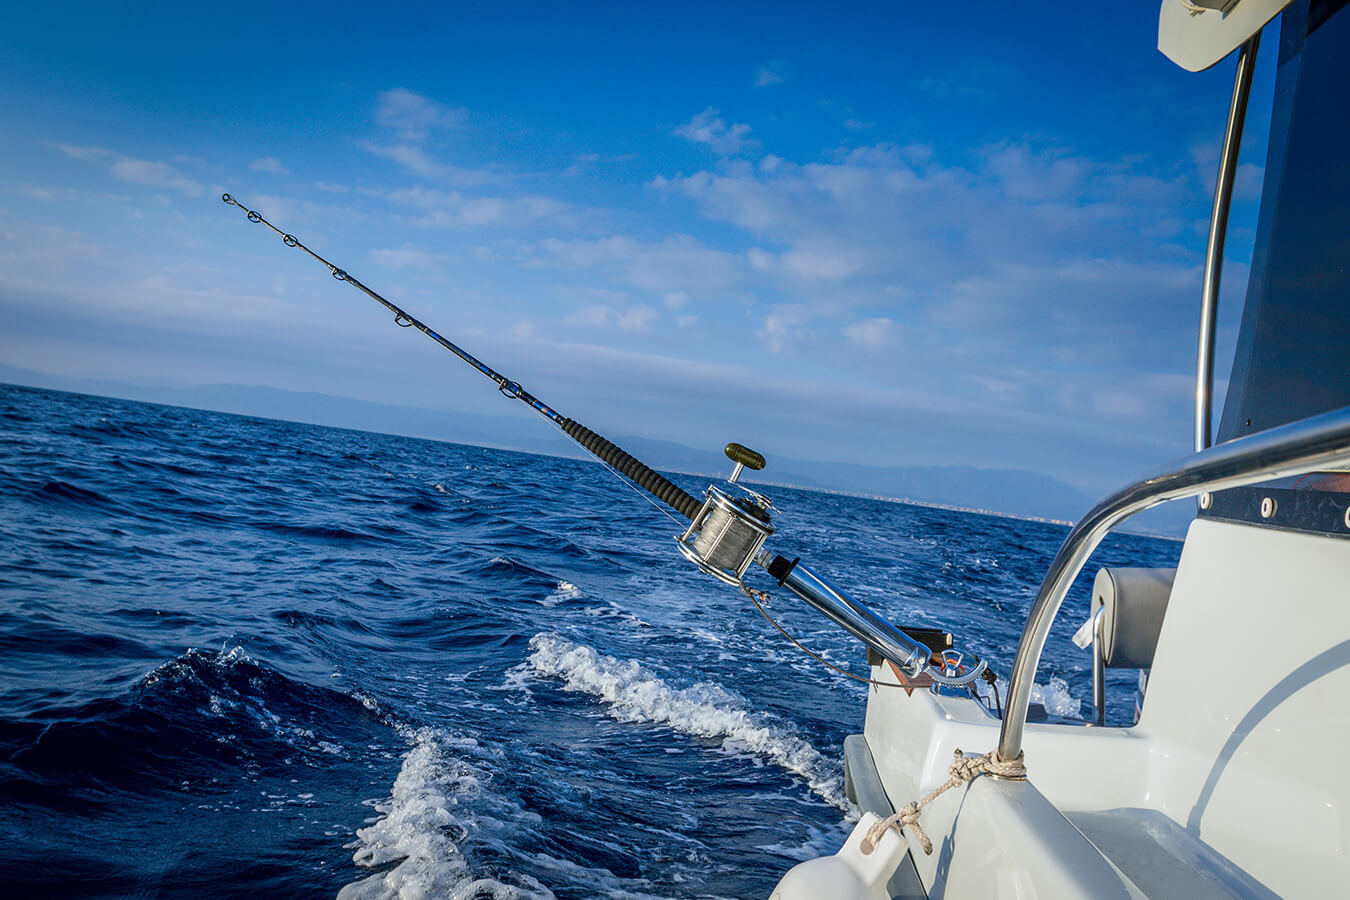 Go Deep Sea Fishing in The Gulf Of Mexico - FloridaTix